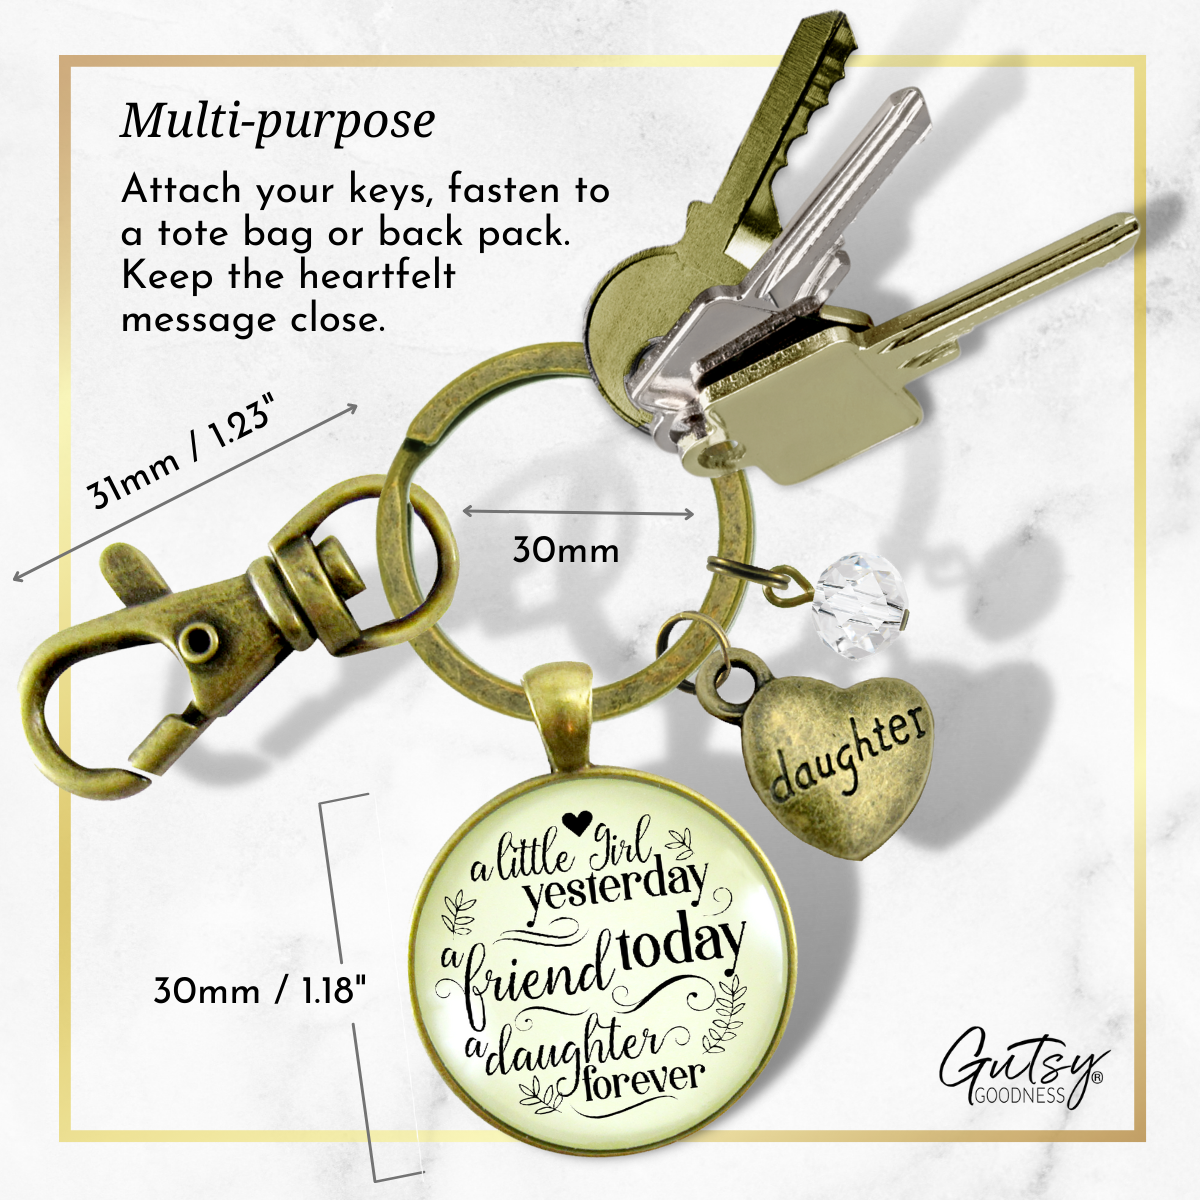 To My Daughter Keychain A Little Girl Yesterday From Mom Inspirational Friendship Jewelry Gift - Gutsy Goodness Handmade Jewelry;To My Daughter Keychain A Little Girl Yesterday From Mom Inspirational Friendship Jewelry Gift - Gutsy Goodness Handmade Jewelry Gifts